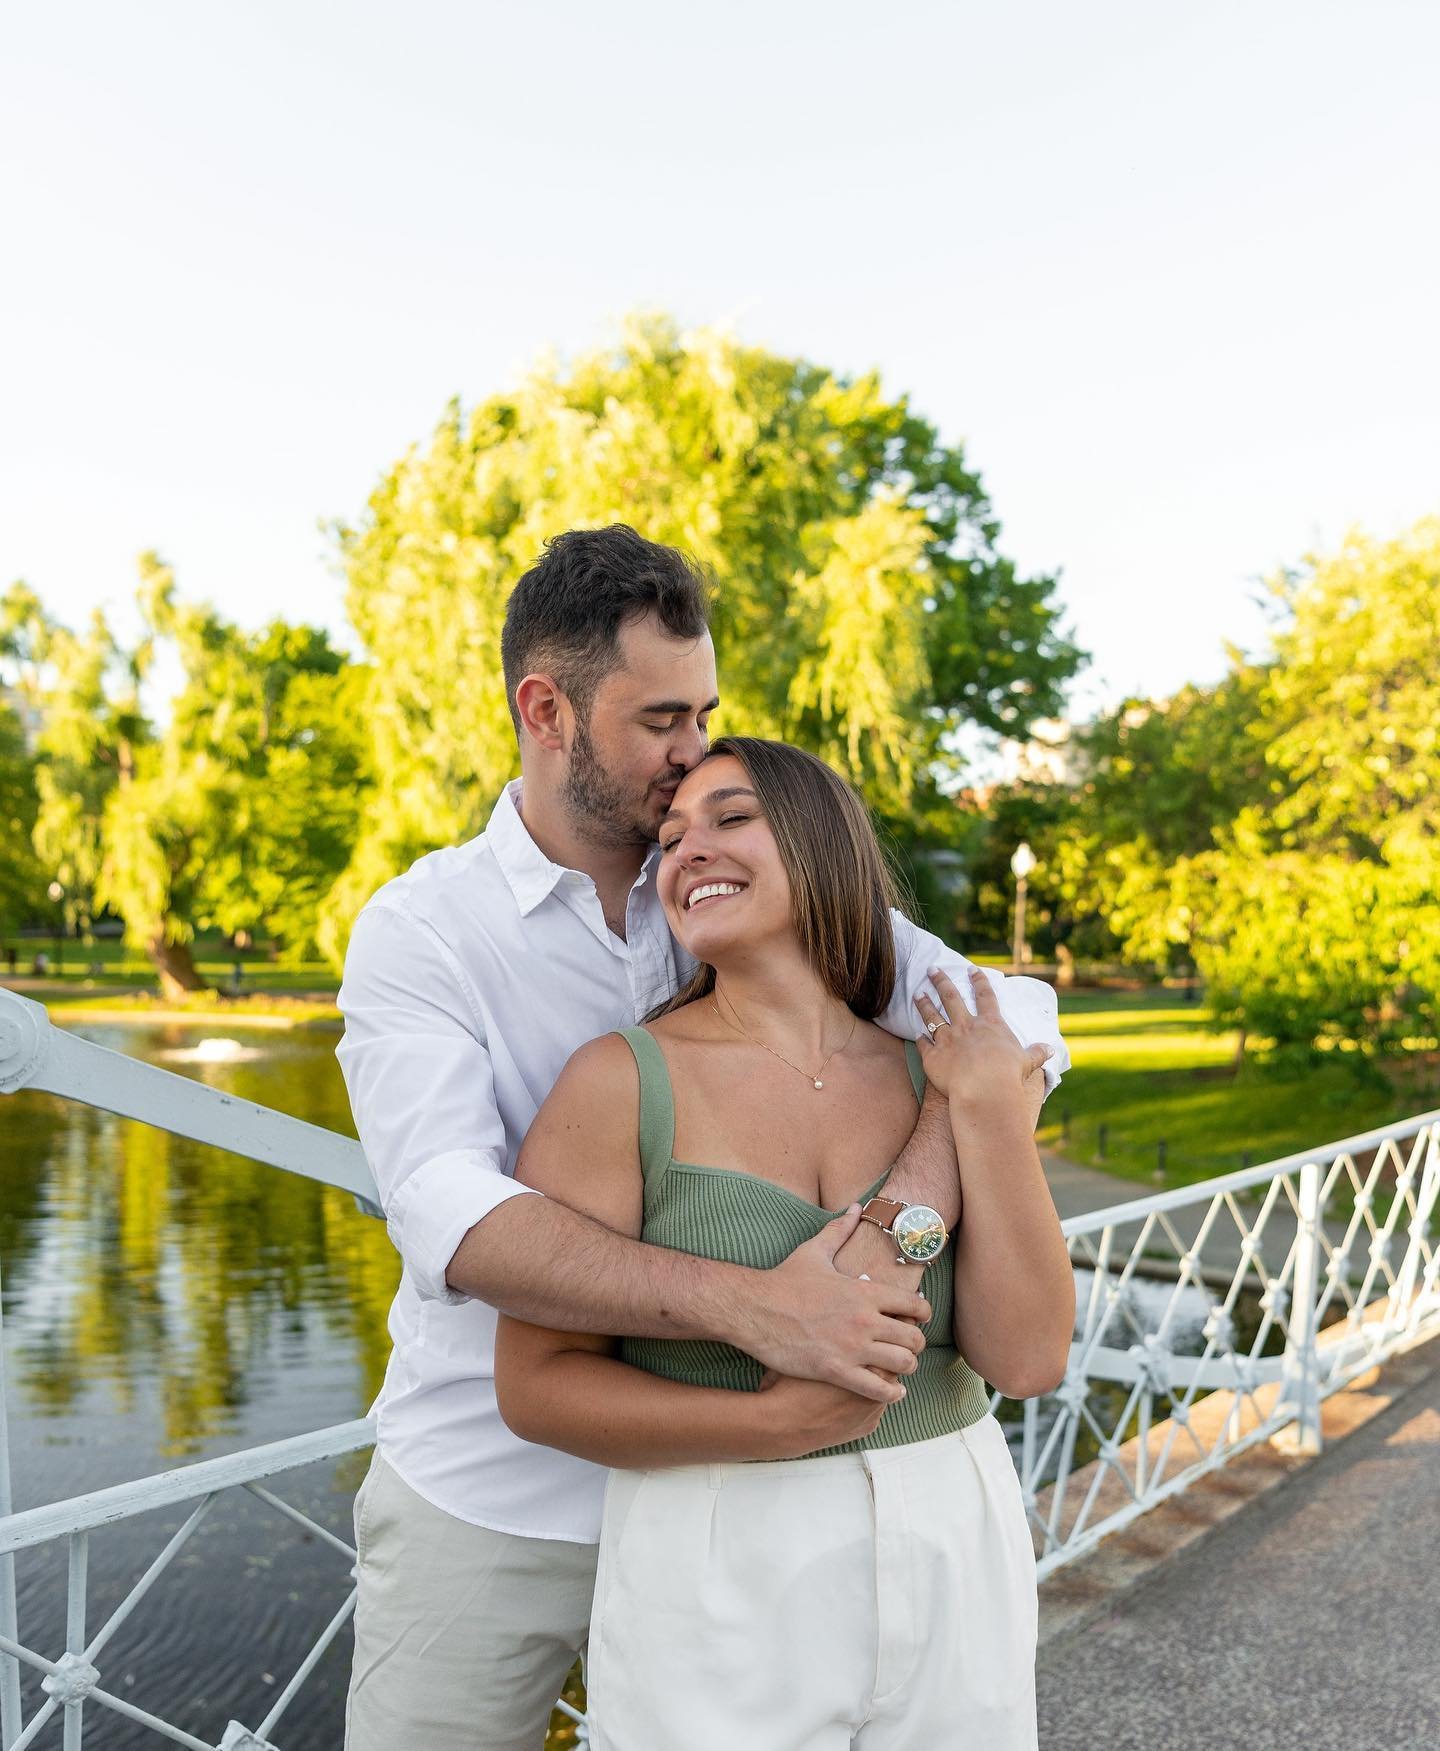 The Boston Public Garden is one of my favorite places to take engagement photos. Everything about this garden is perfect; from the picturesque bridge to the willow trees. It is truly magical year-round. 

#bostonpublicgarden #boston #bostonphotograph